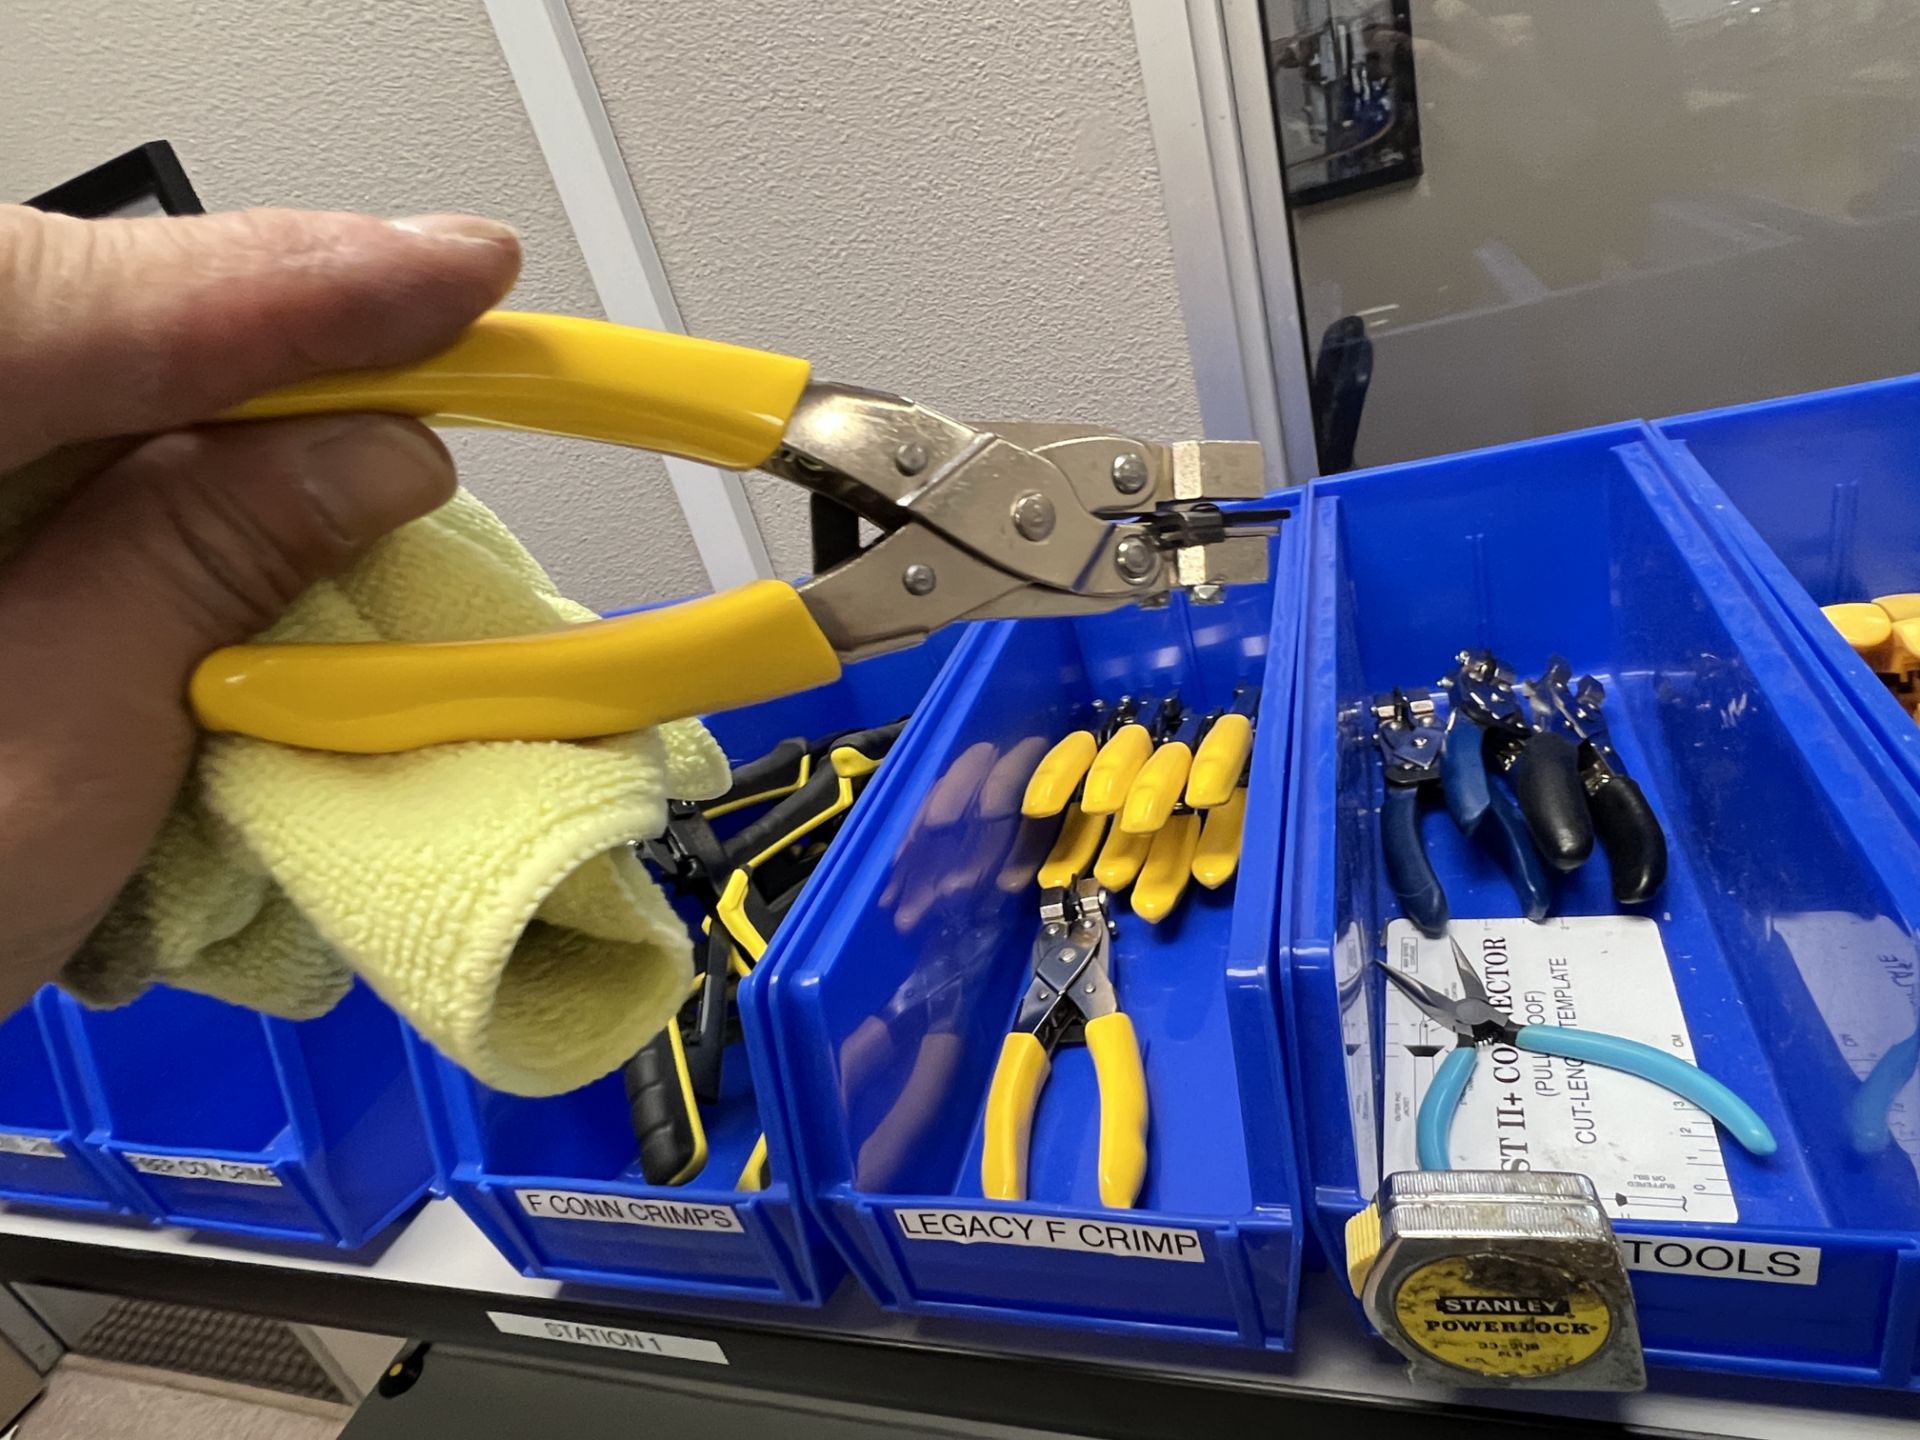 Crimping / Cable Installation Tools - Image 11 of 13